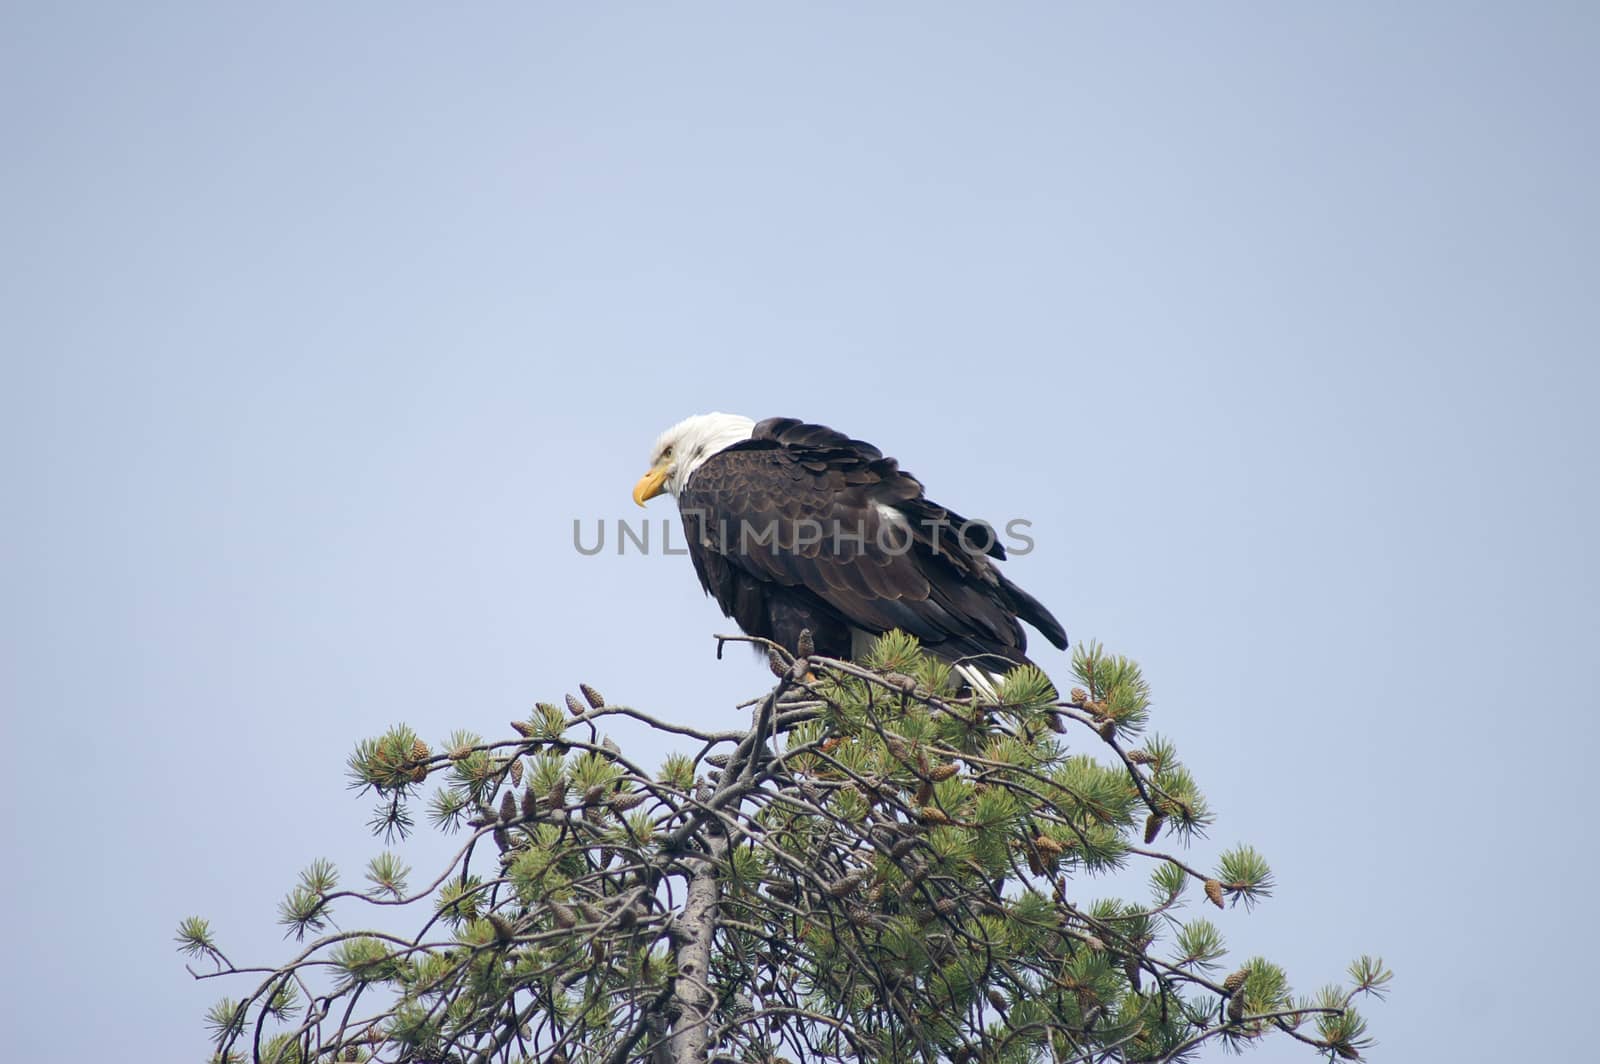 Bald eagle in Yellowstone National Park